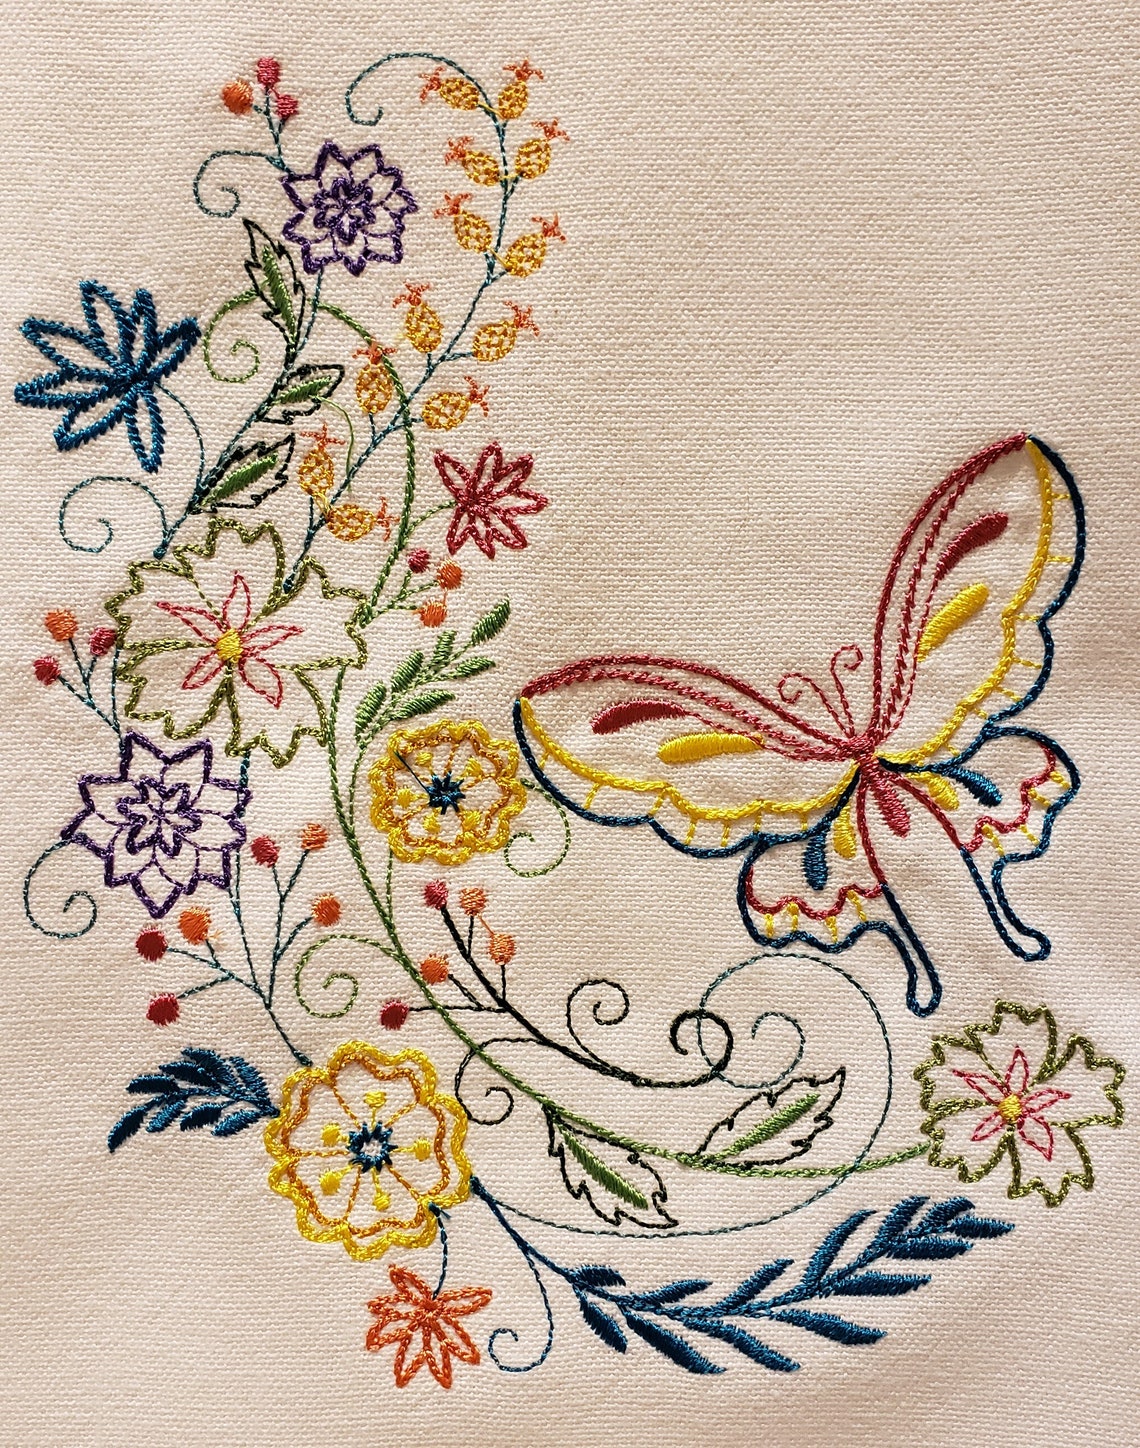 Embroidered Butterfly and Flowers/Butterfly Flourish | Etsy